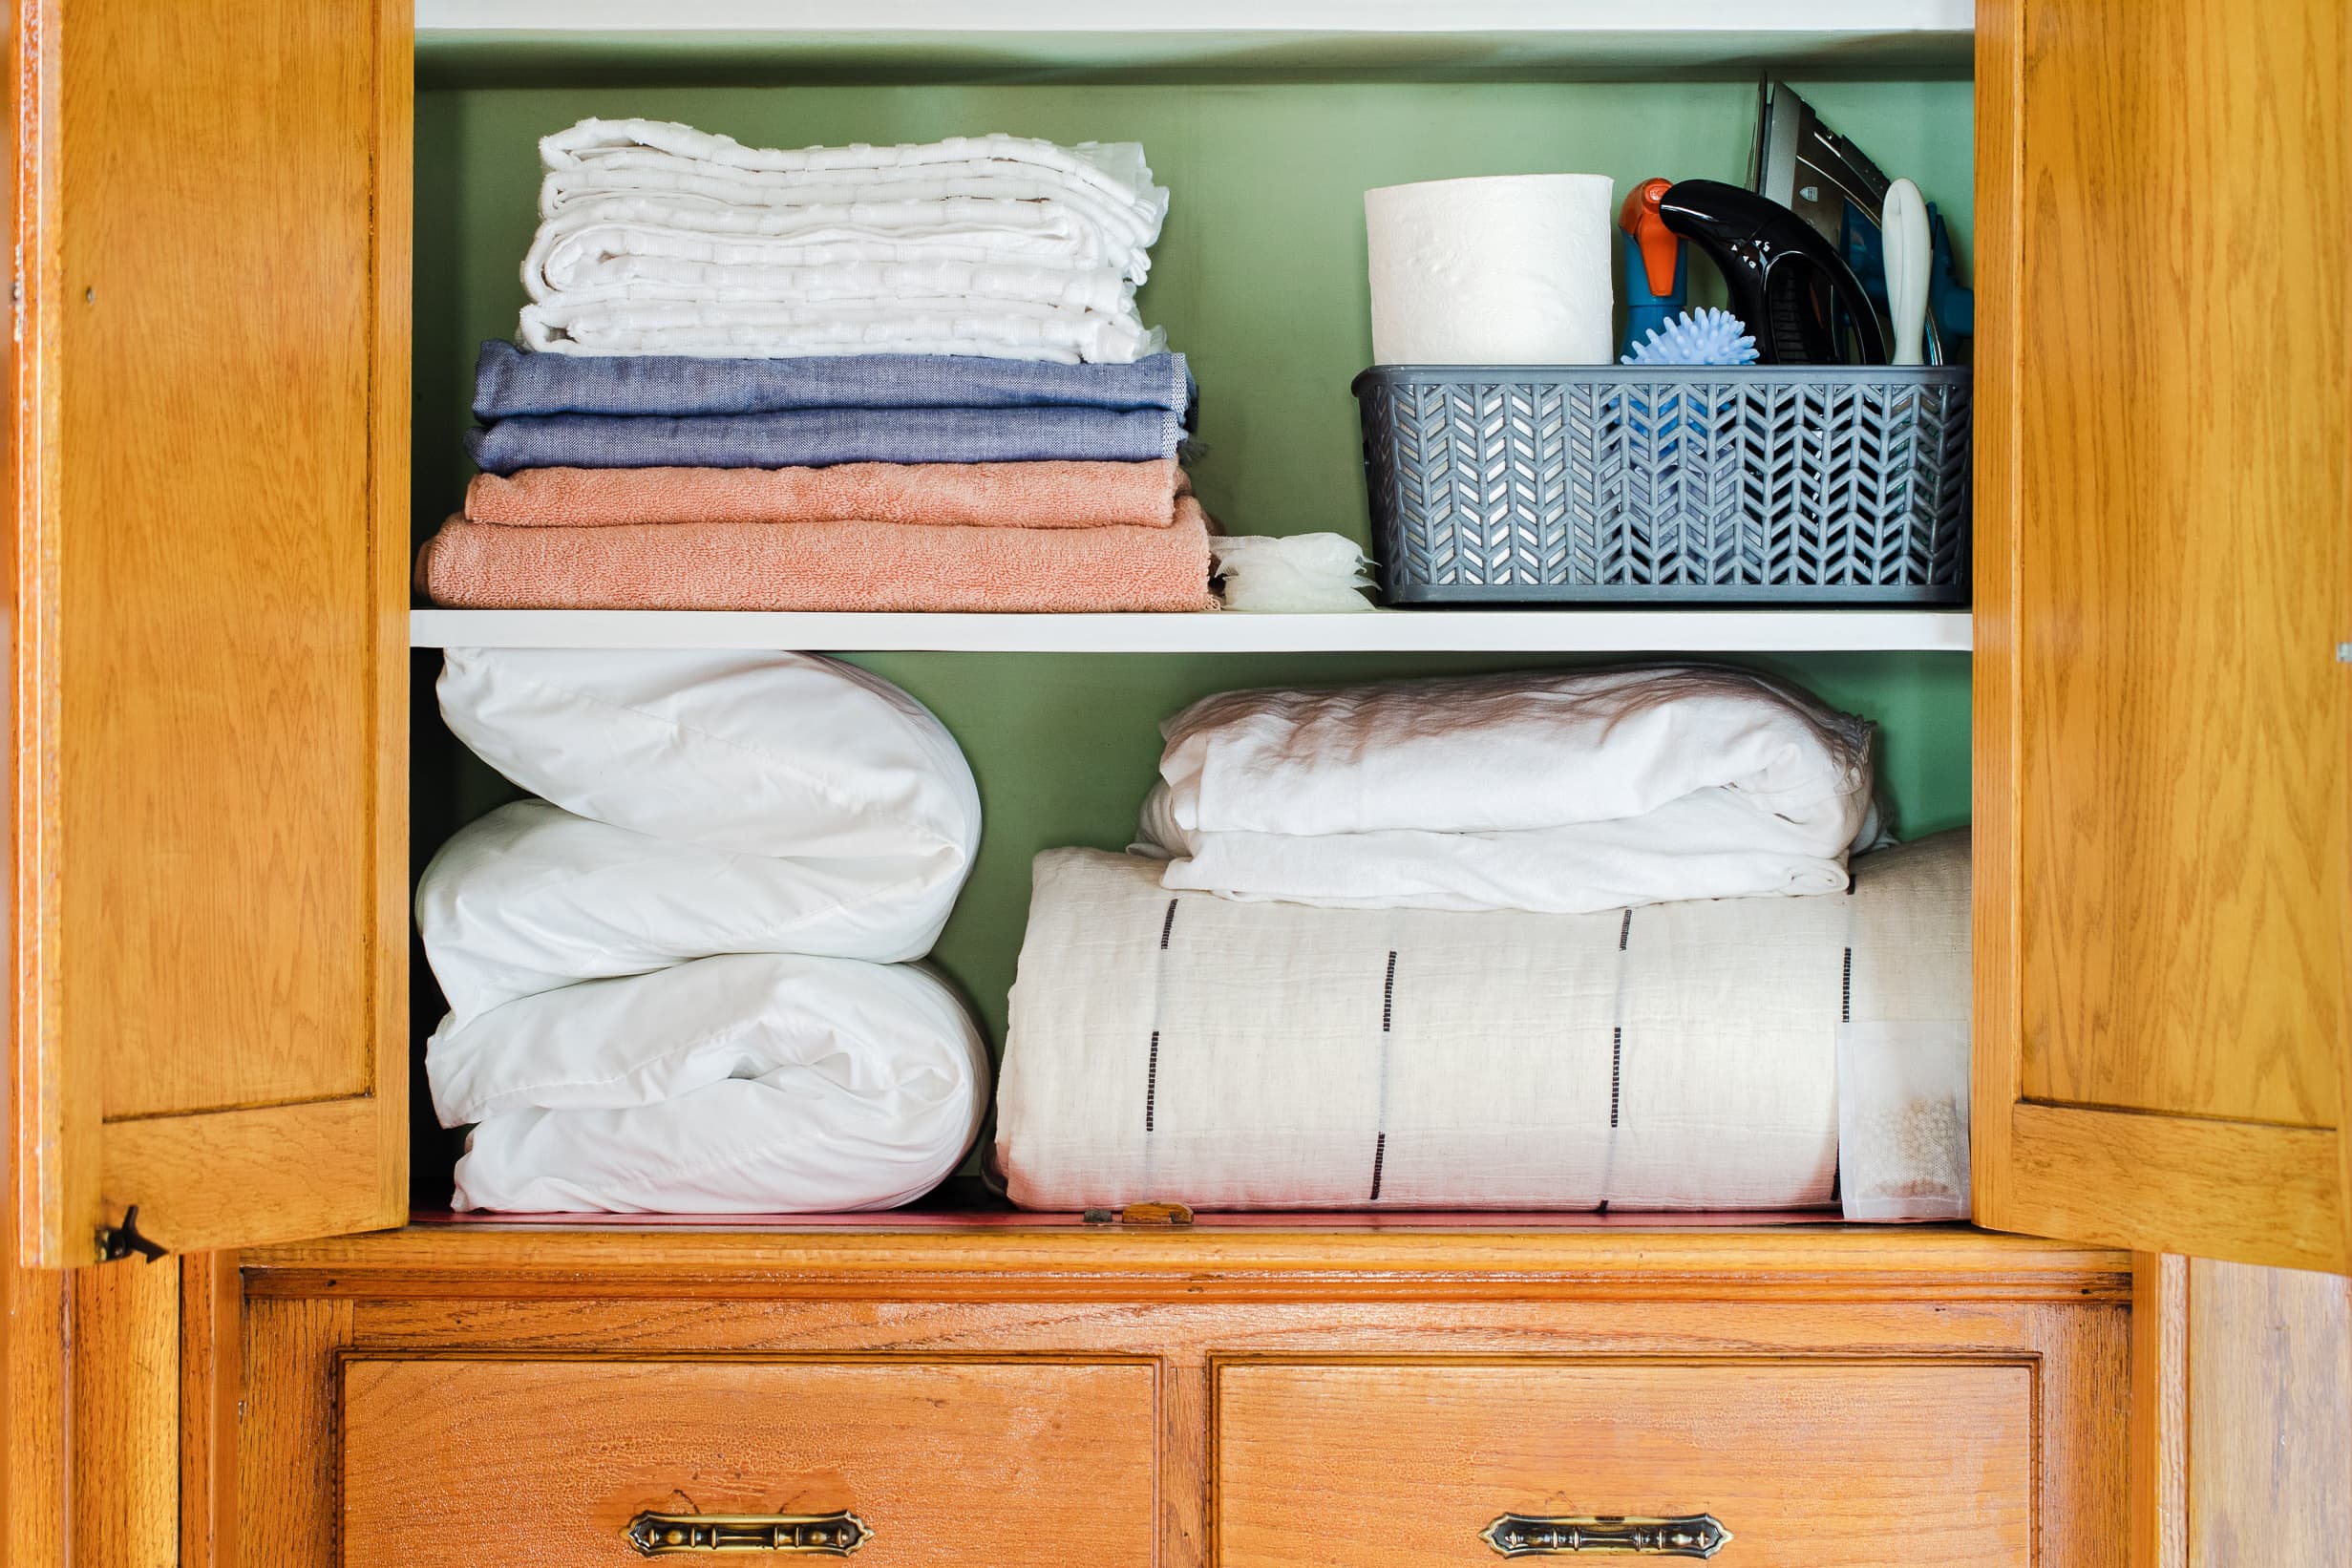 Our Organized Linen Closet (Finally!) - The Homes I Have Made